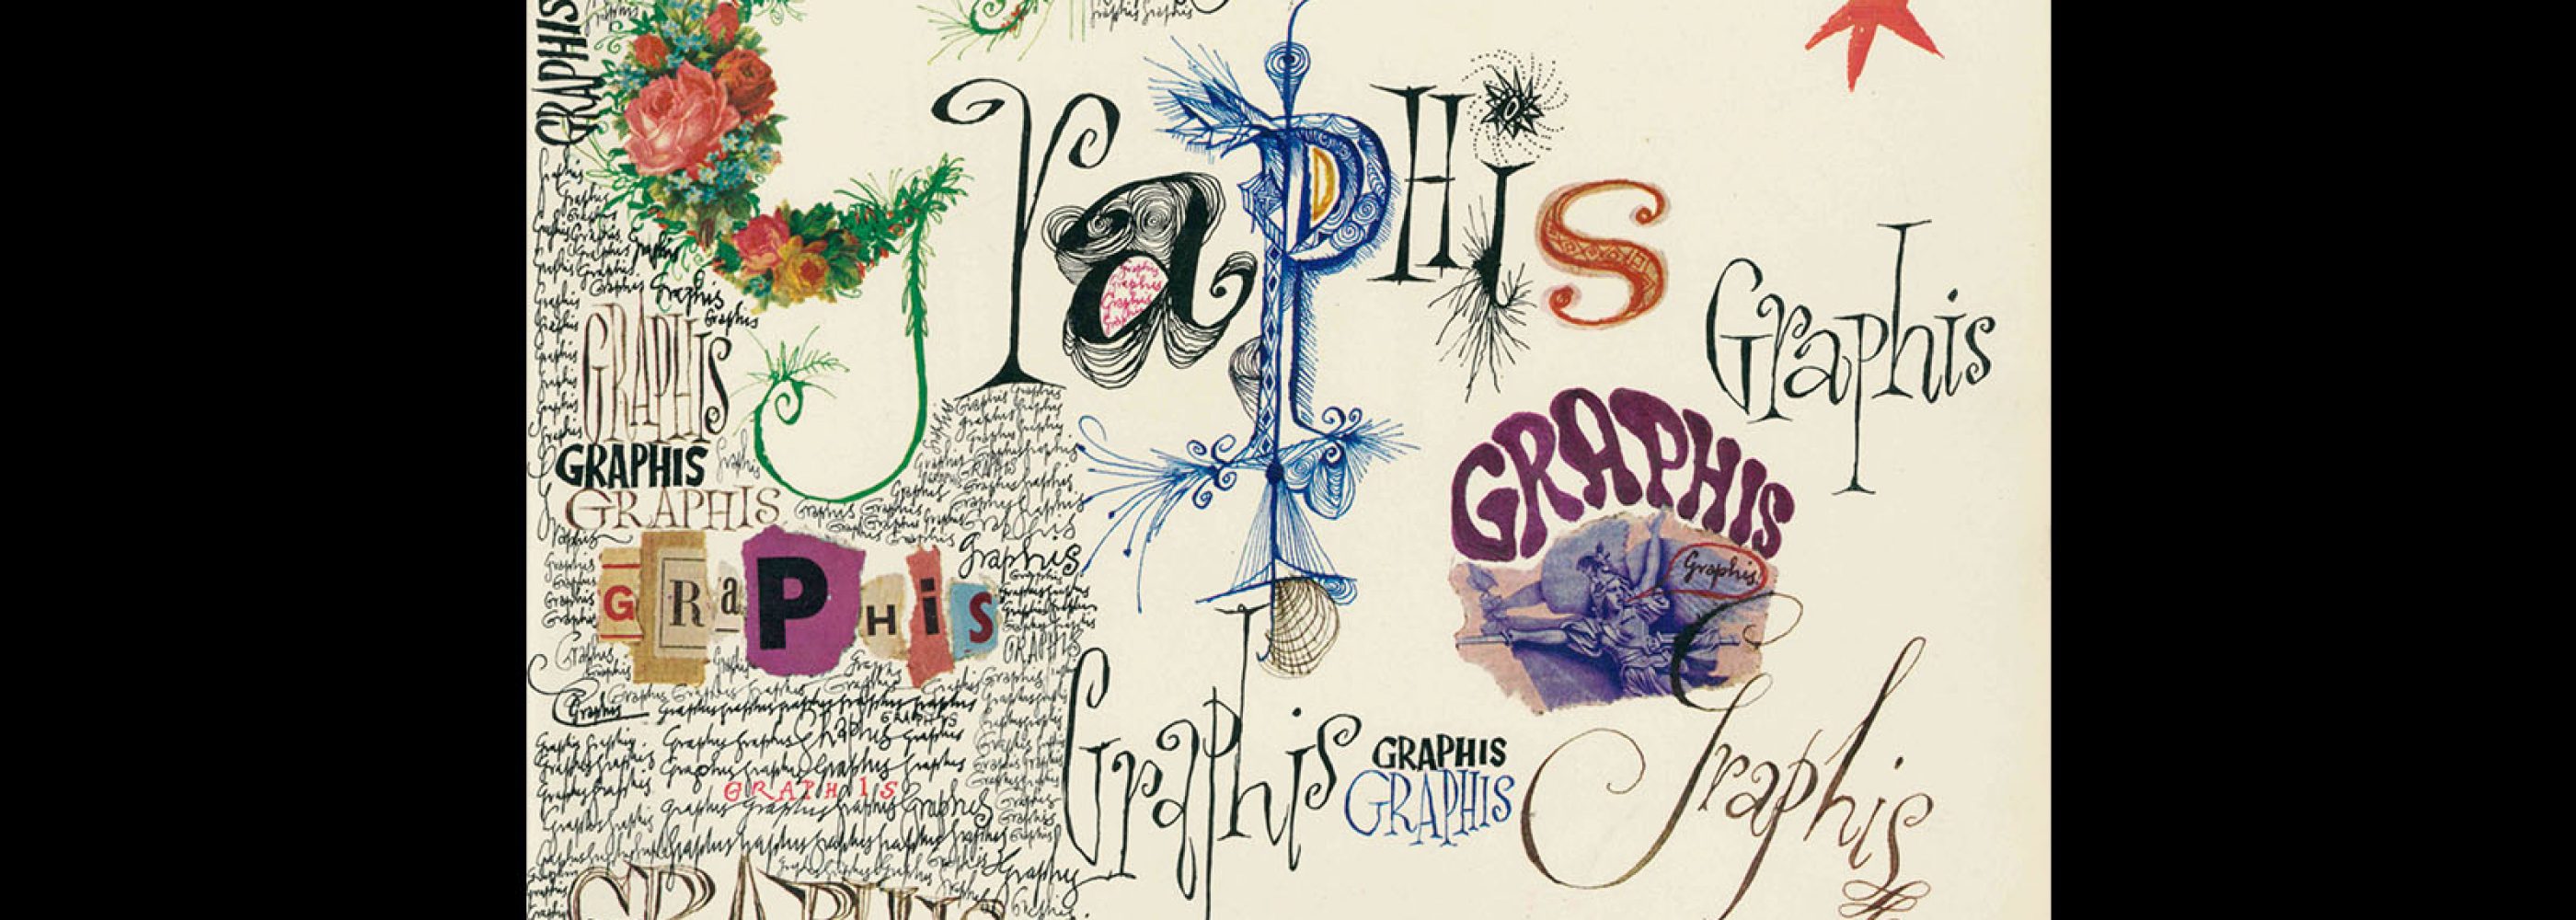 Graphis 129, 1967. Cover design by Ronald Searle.